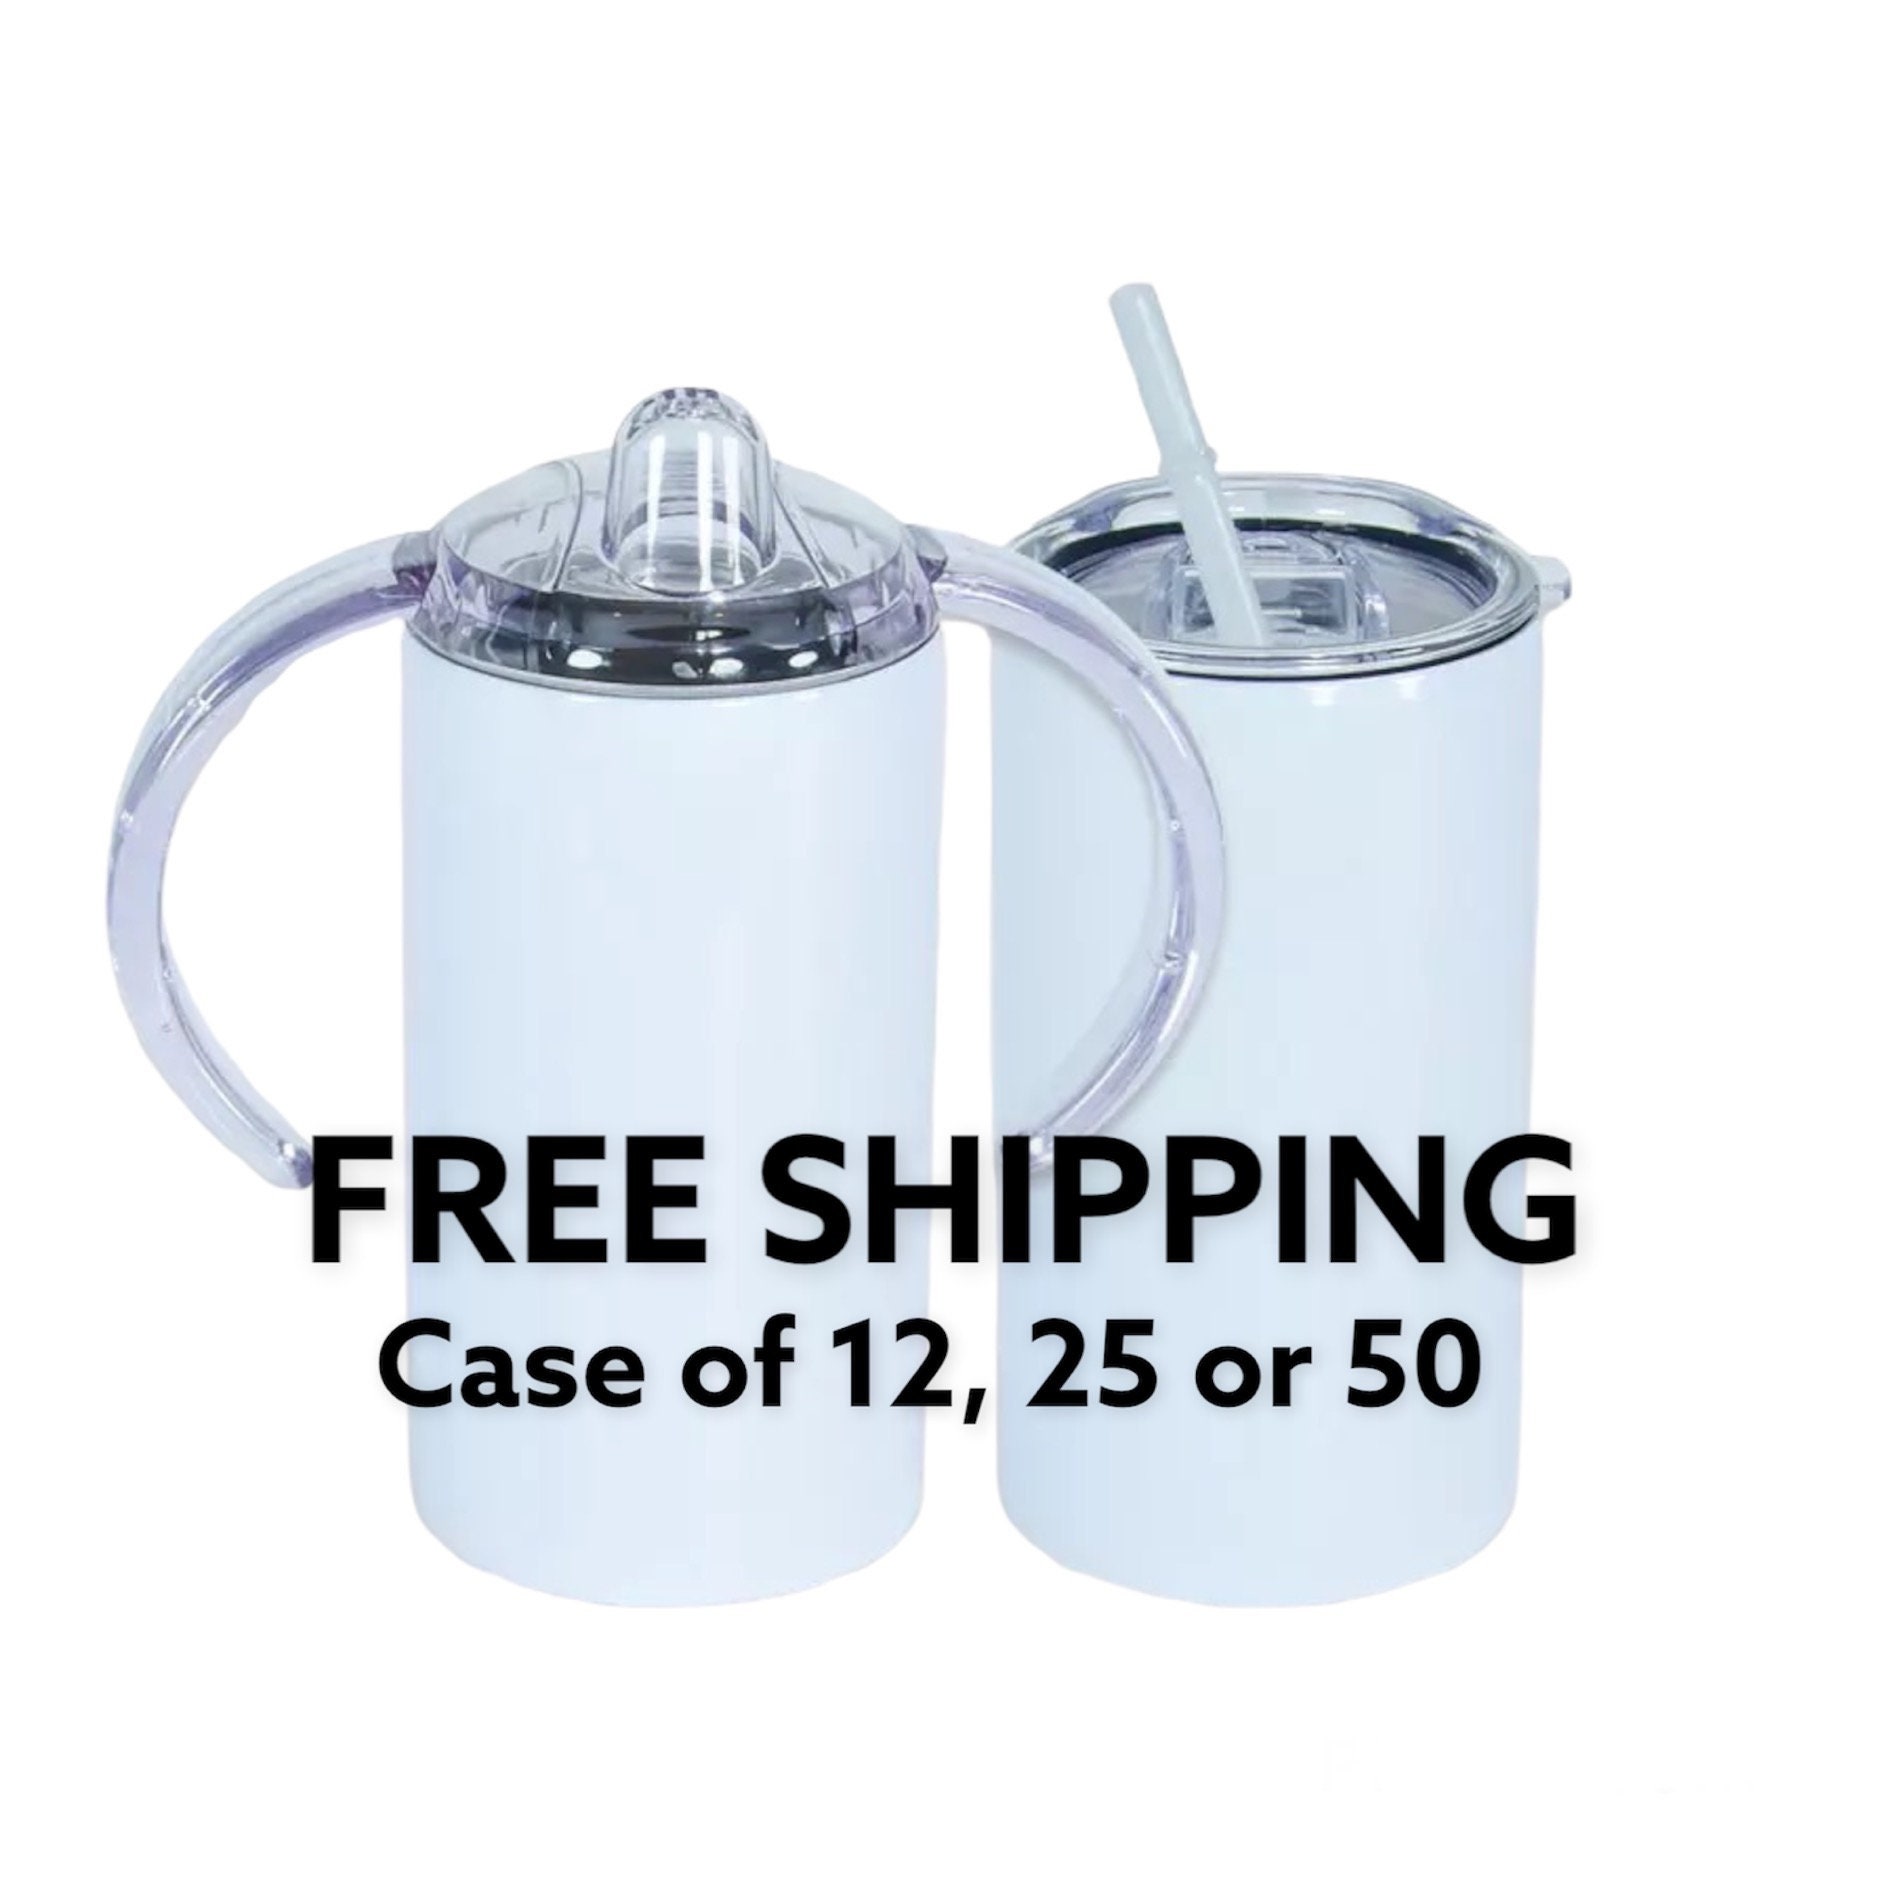 12Pack Stainless Steel Cups for Kids 8oz Small Toddler Cups with